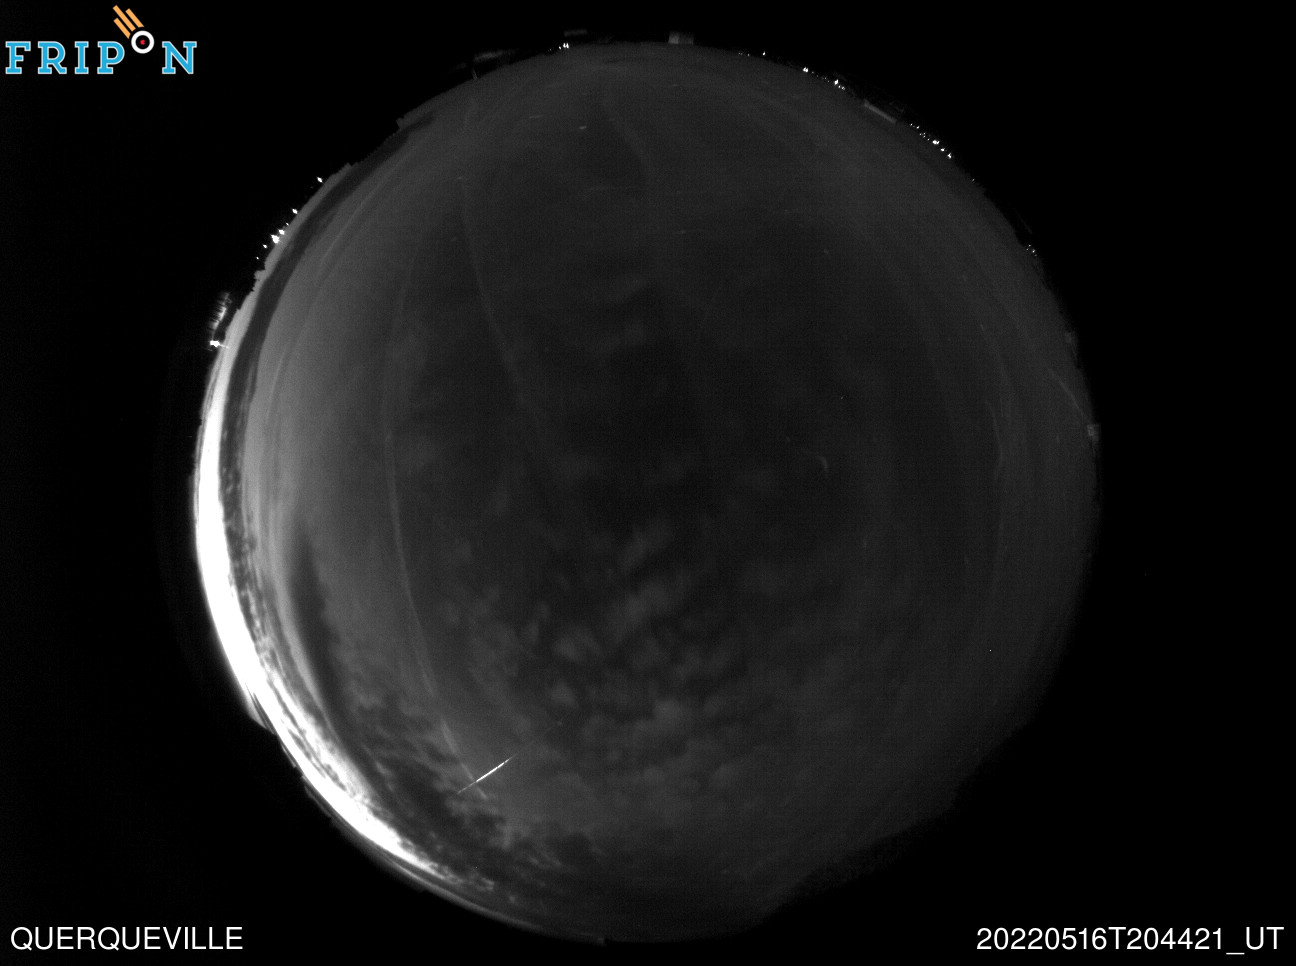 Figure 2a- May 16th, 2022, 20h 44min UT fireball captured by Fripon video station in Querqueville (France). Credit: FRIPON/Vigie-Ciel